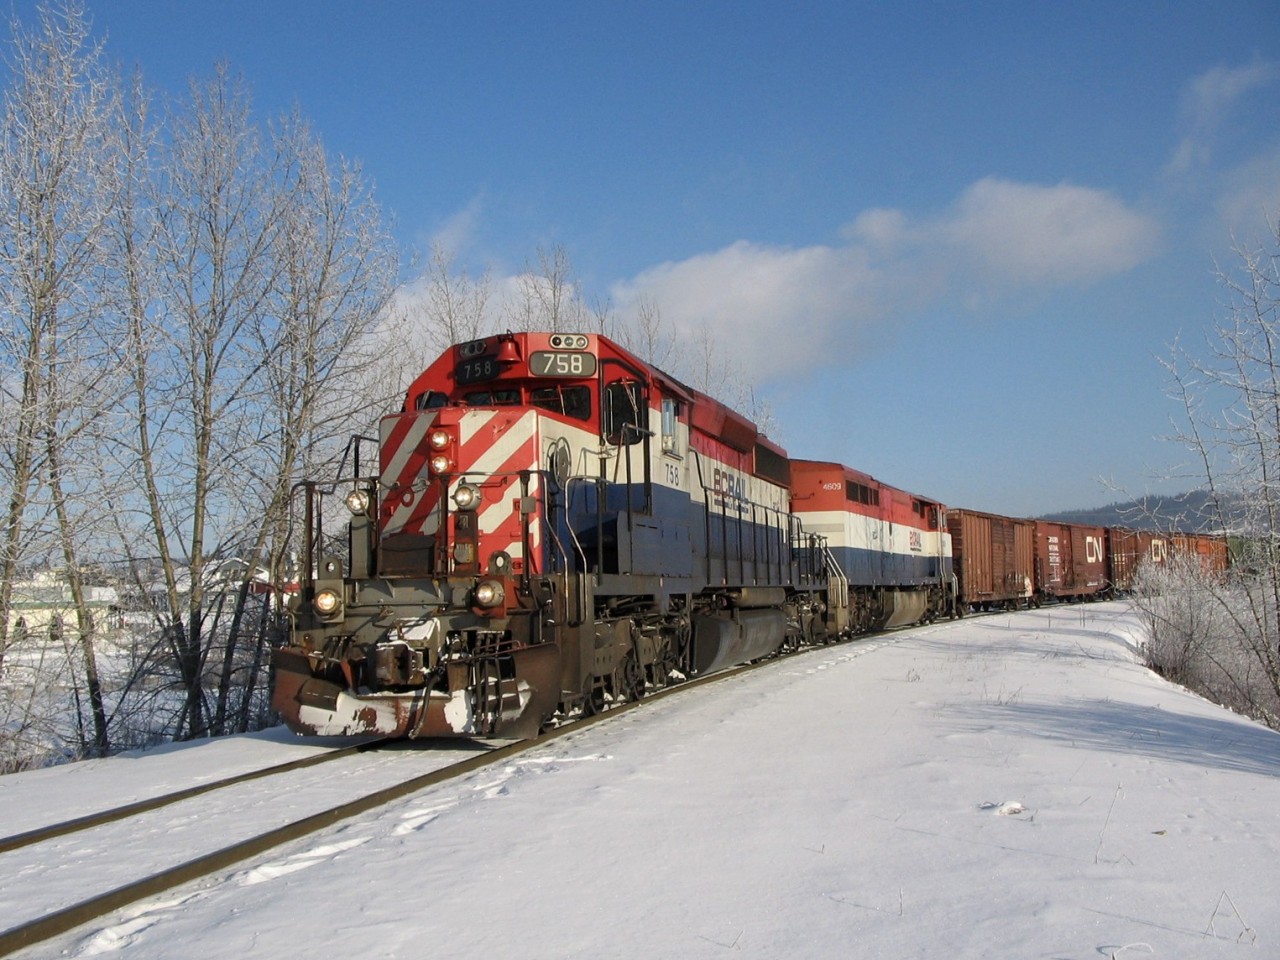 Nice sunny day and a great day for a train ride. Stopped at Quesnel to do some set out and a pickup, pumping air and time for a photo or two. It was bitterly cold that morning and wished we had the second unit 4609 leading instead of the 758.